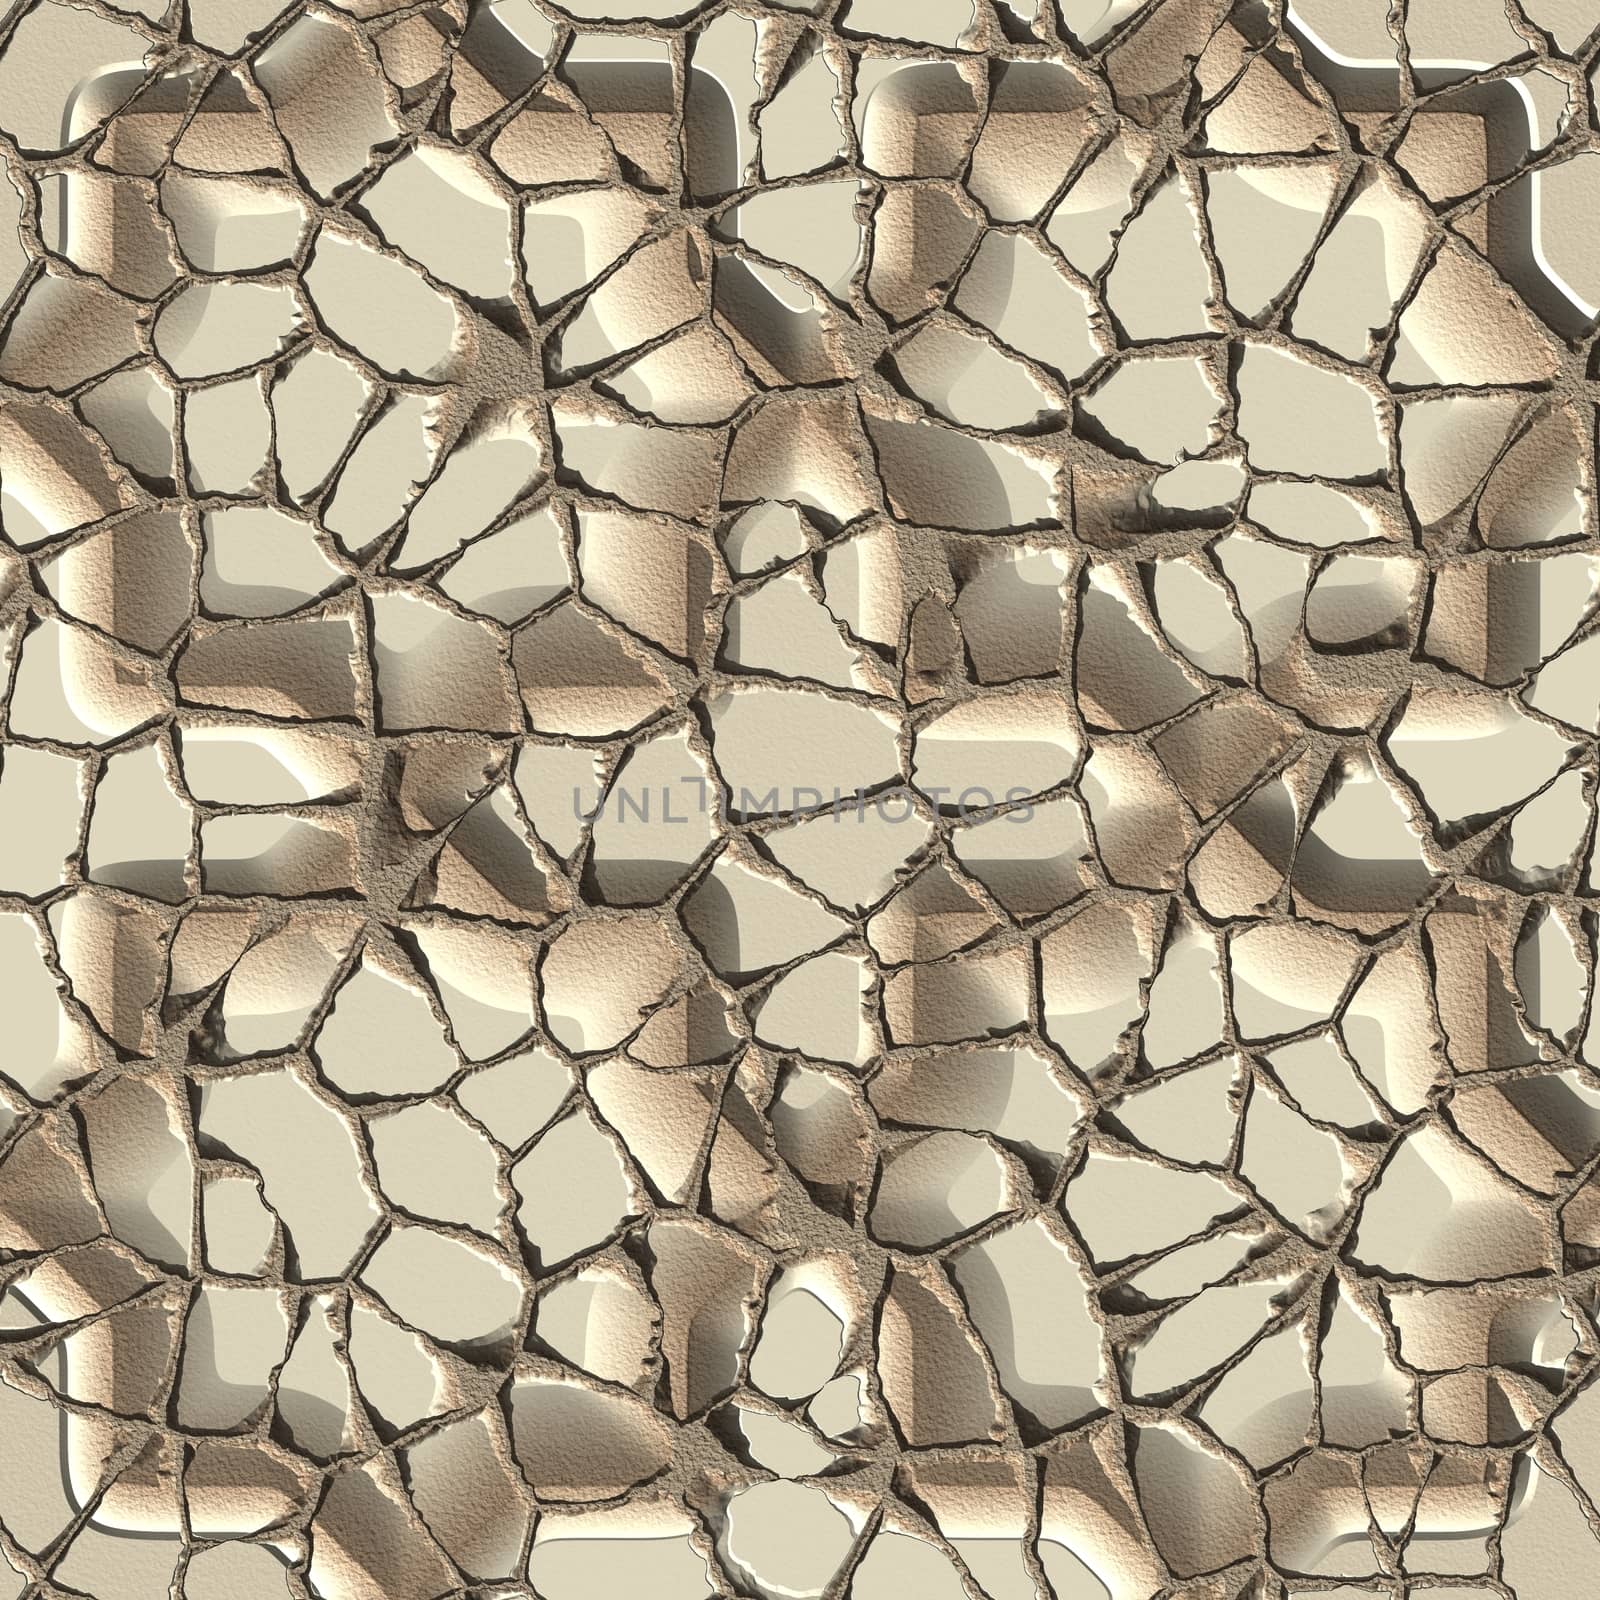 Cracked stone pavement seamless tileable decorative background pattern.